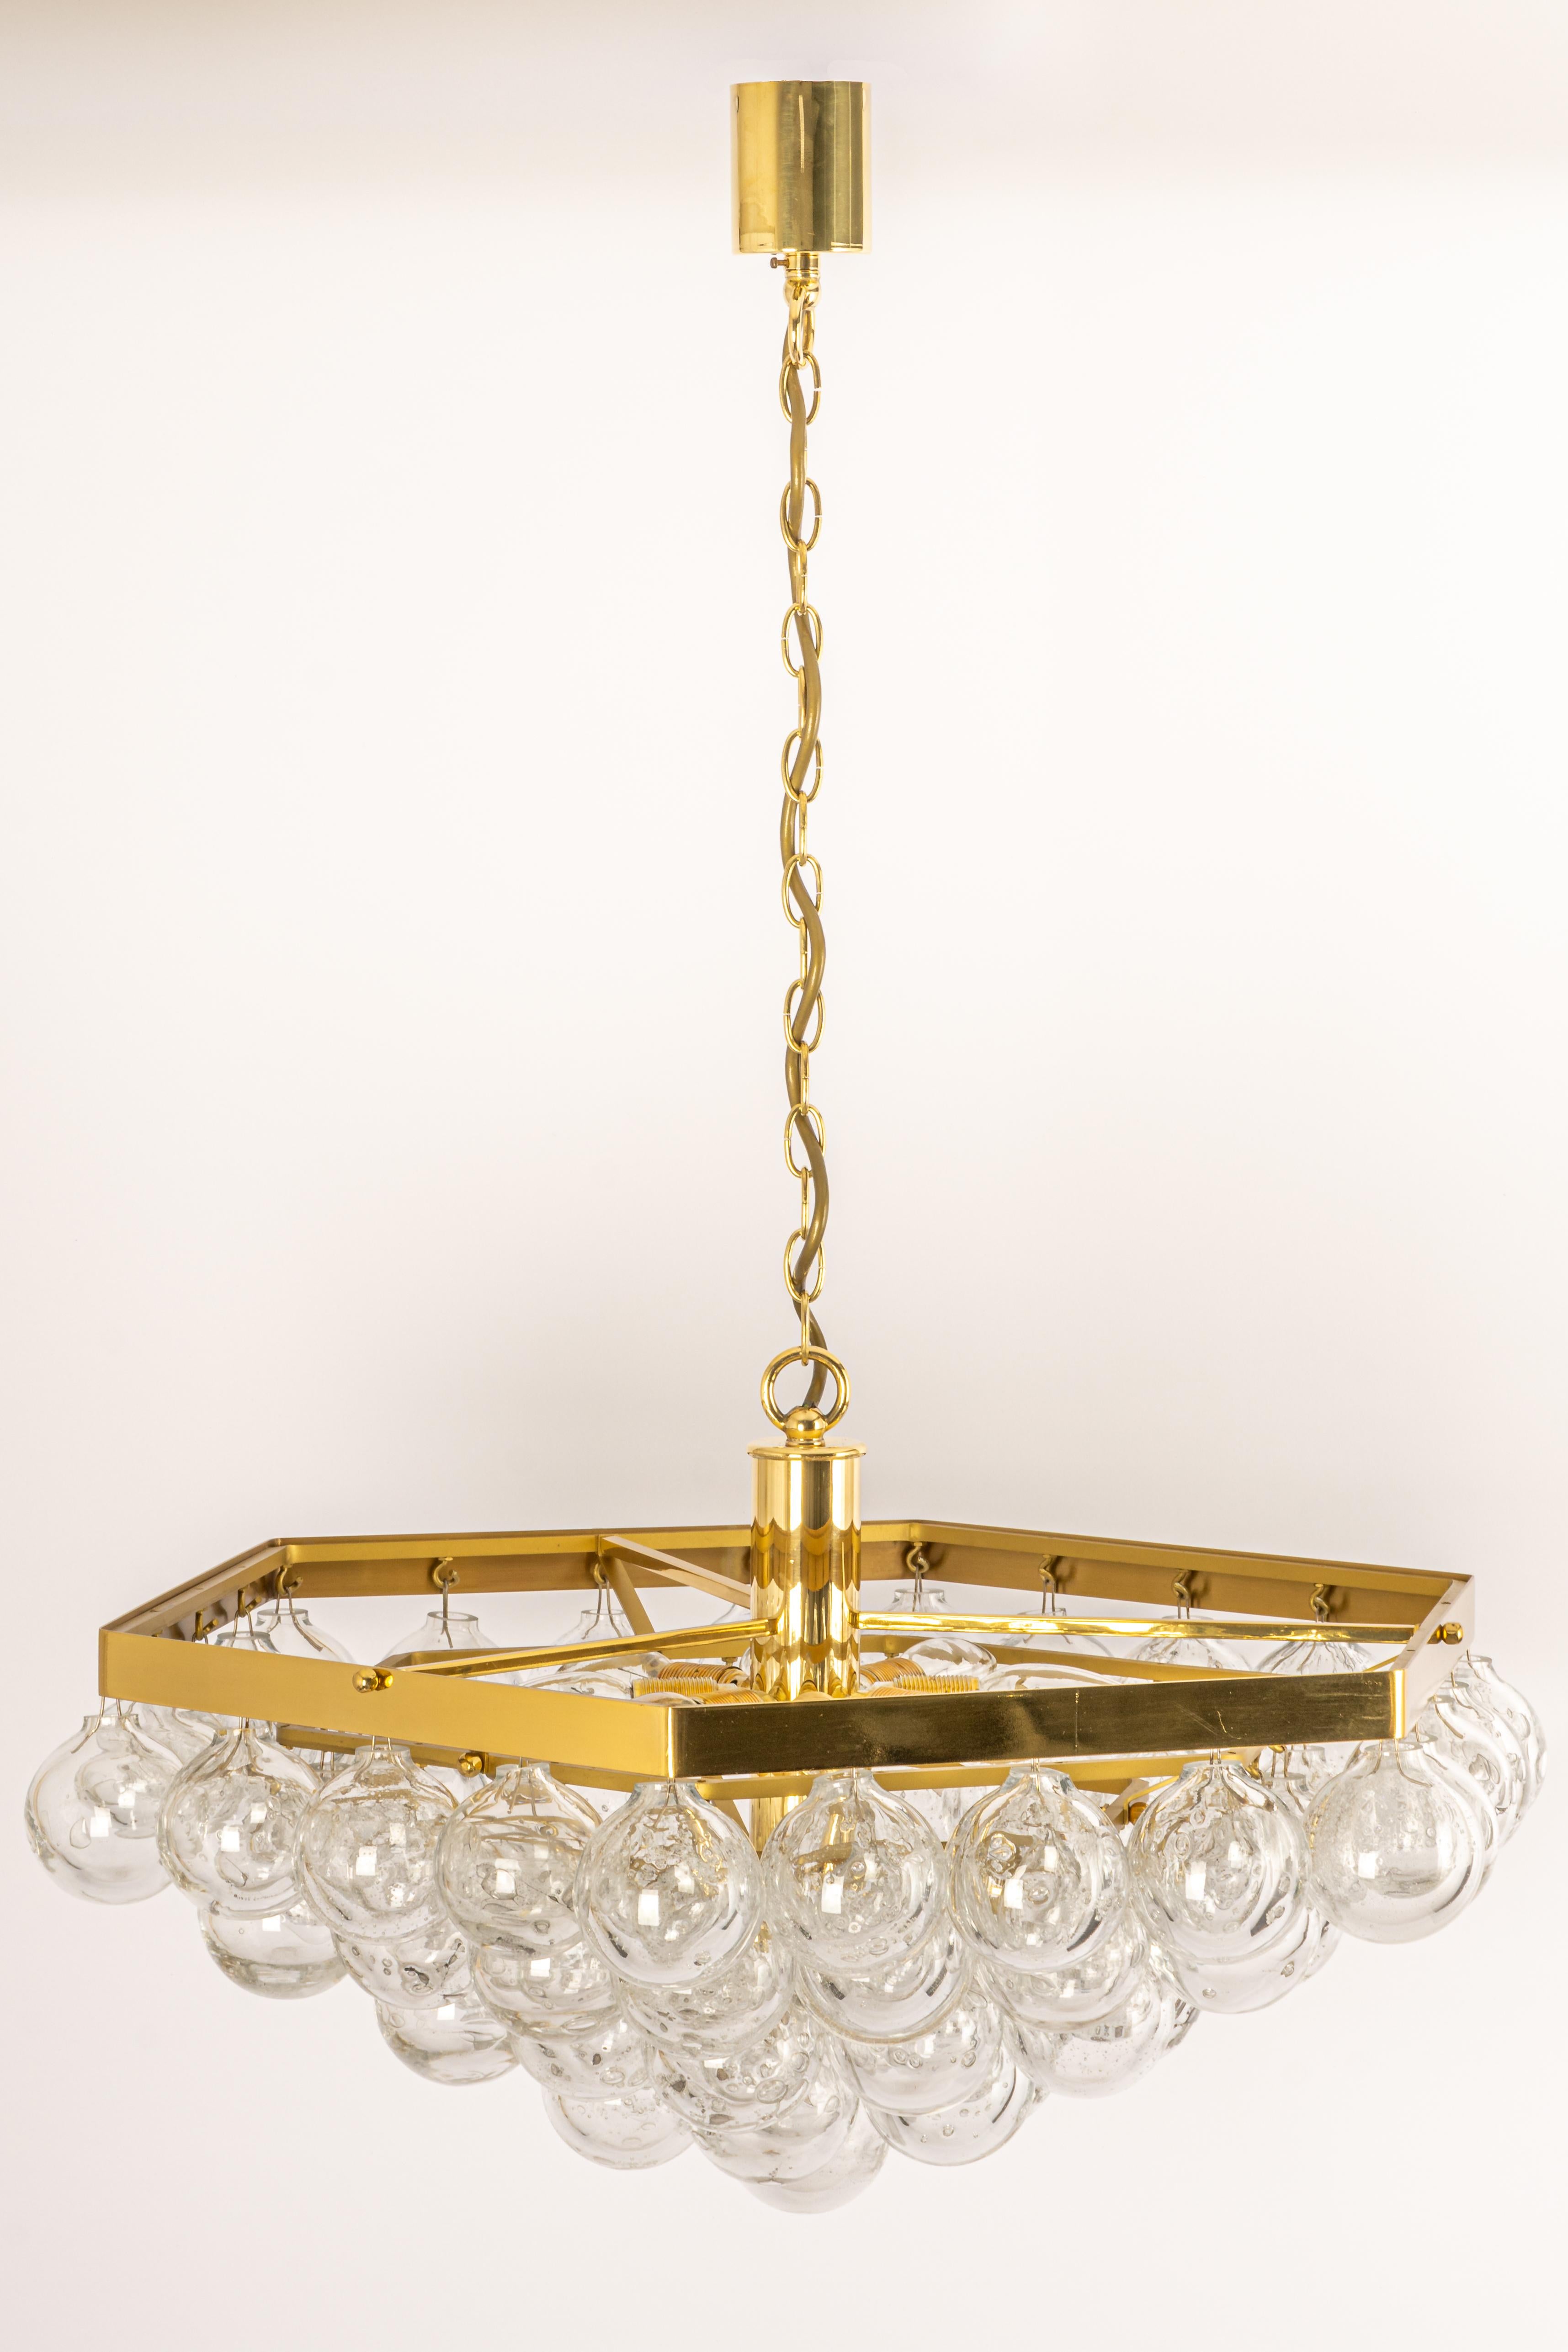 Wonderful onion-shaped -Tulipan glass chandelier. 61 hand-blown glasses suspended on a brass metal frame.
Best of design from the 1960s by Kaiser Leuchten, Germany. High quality of the materials.

Sockets: The chandelier takes 8 small screw base